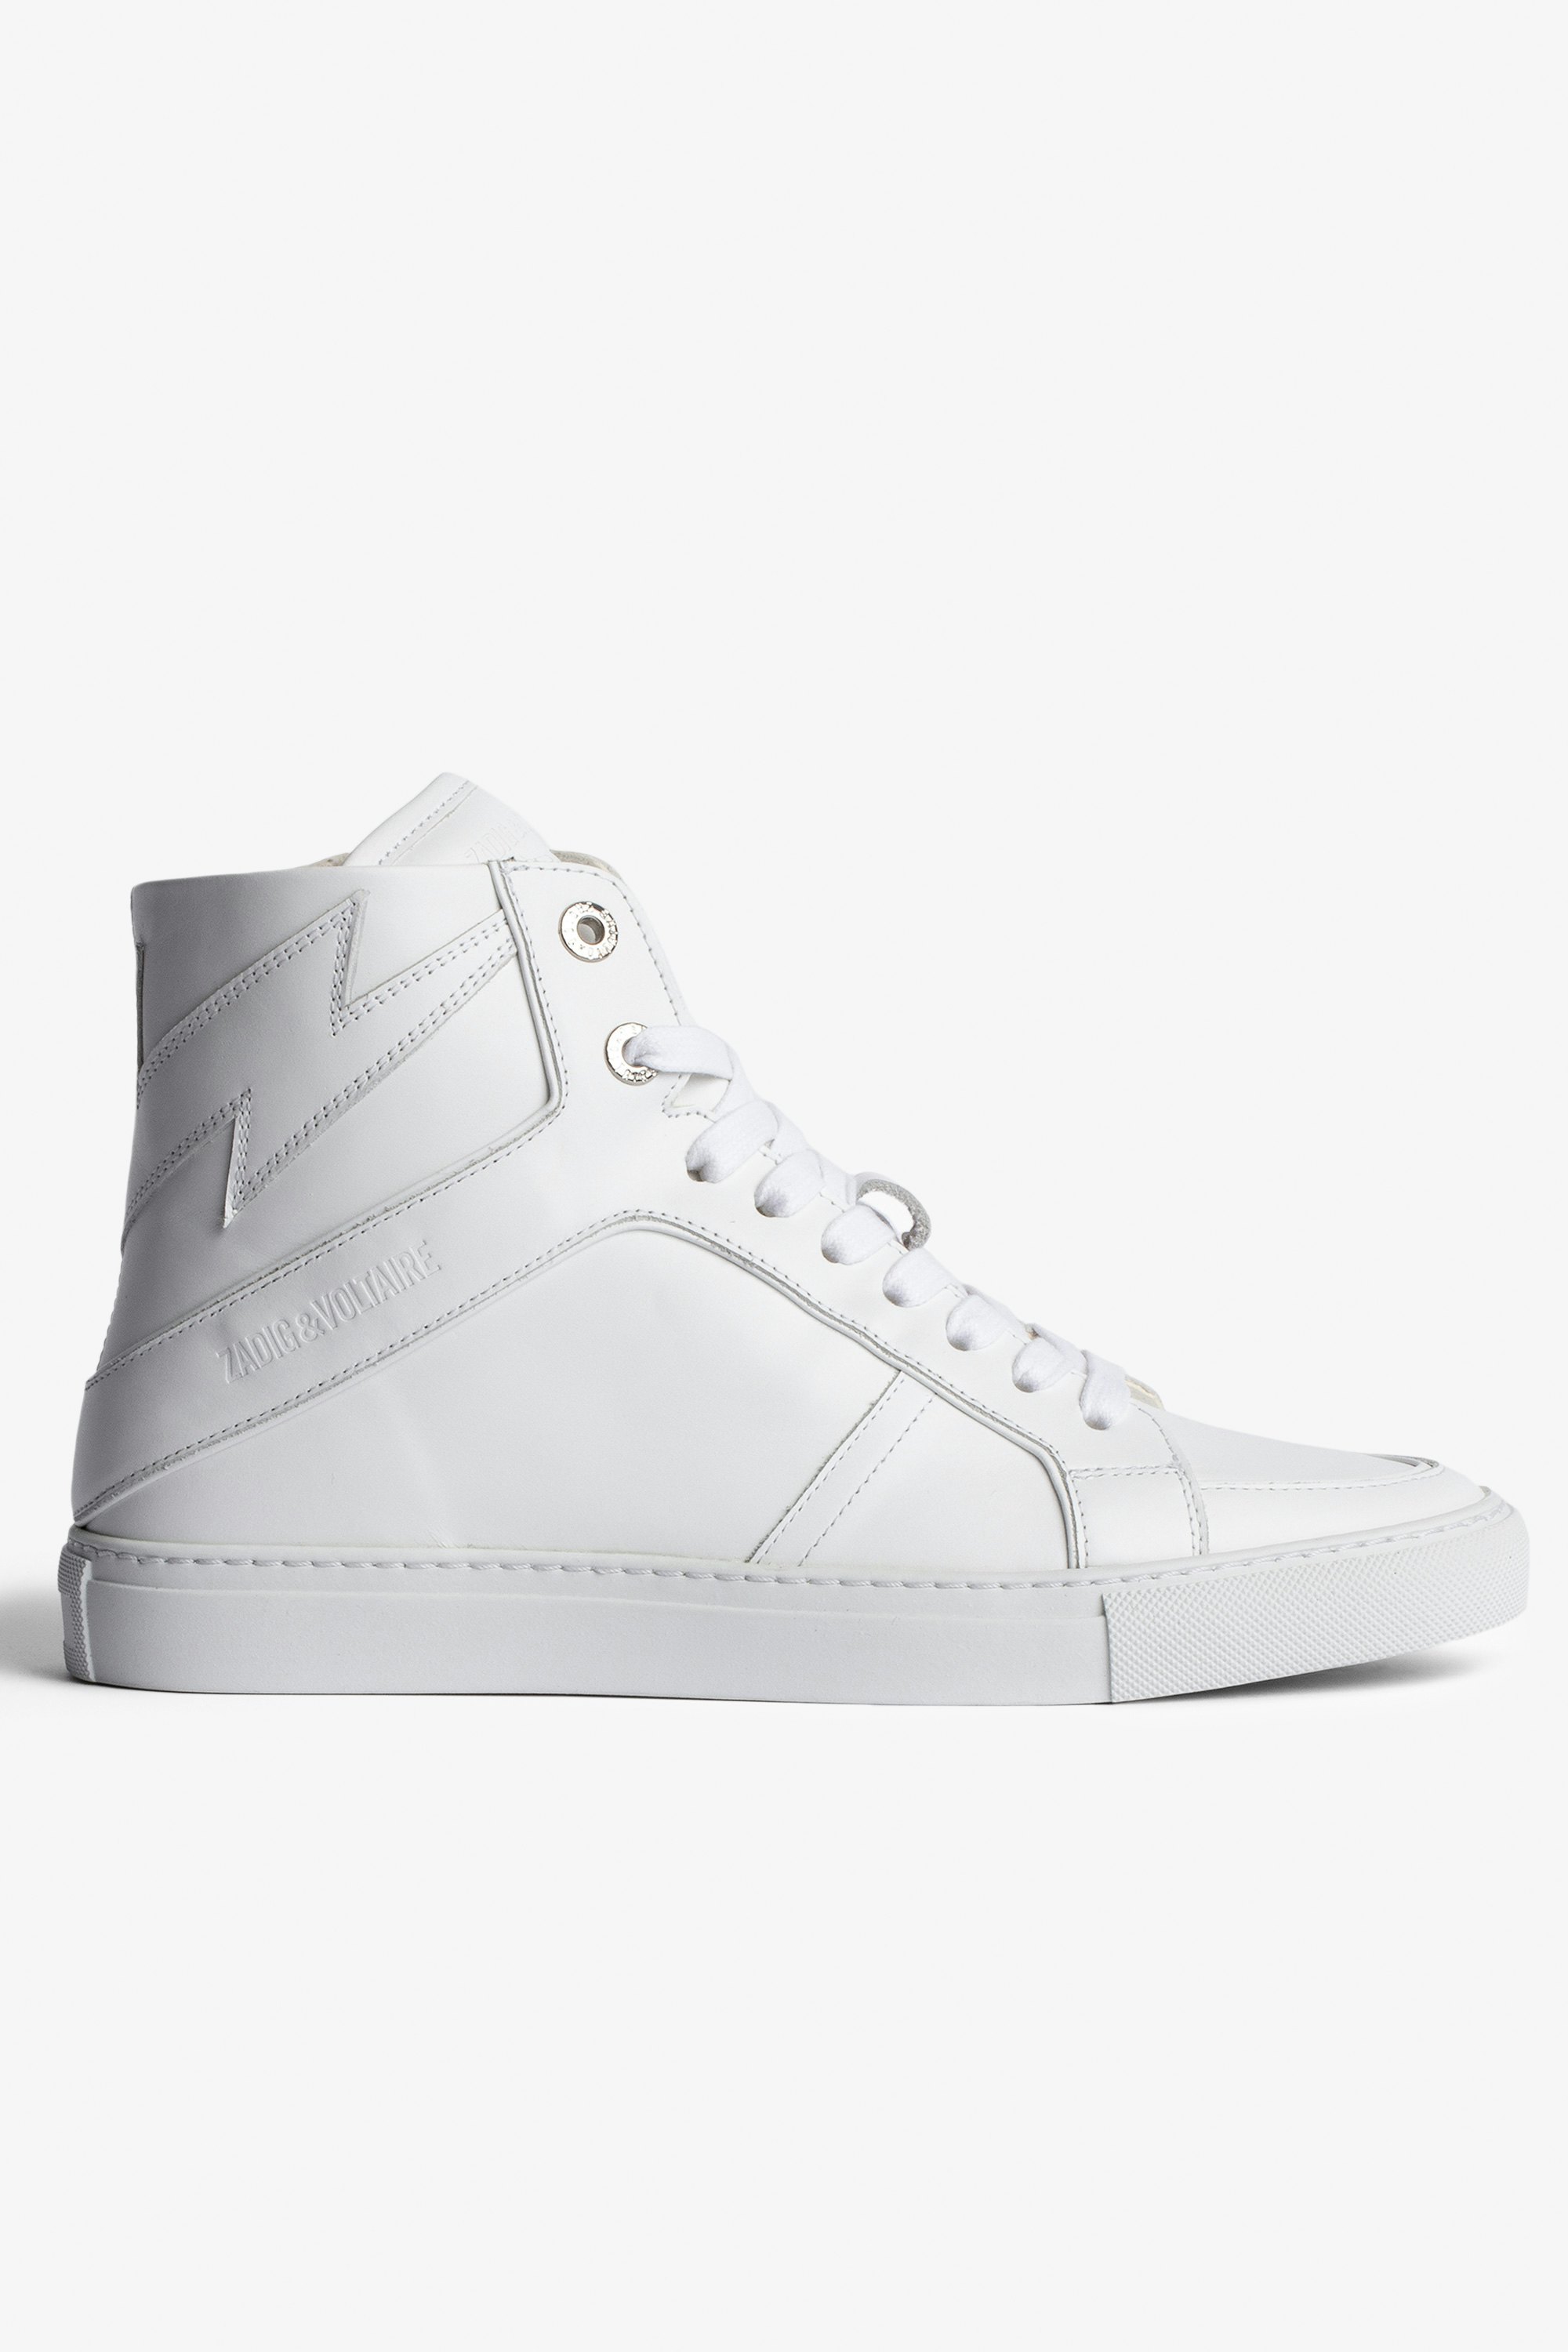 ZV1747 High Flash High-Top Trainers Women’s high-top trainers ZV1747 in smooth white leather.